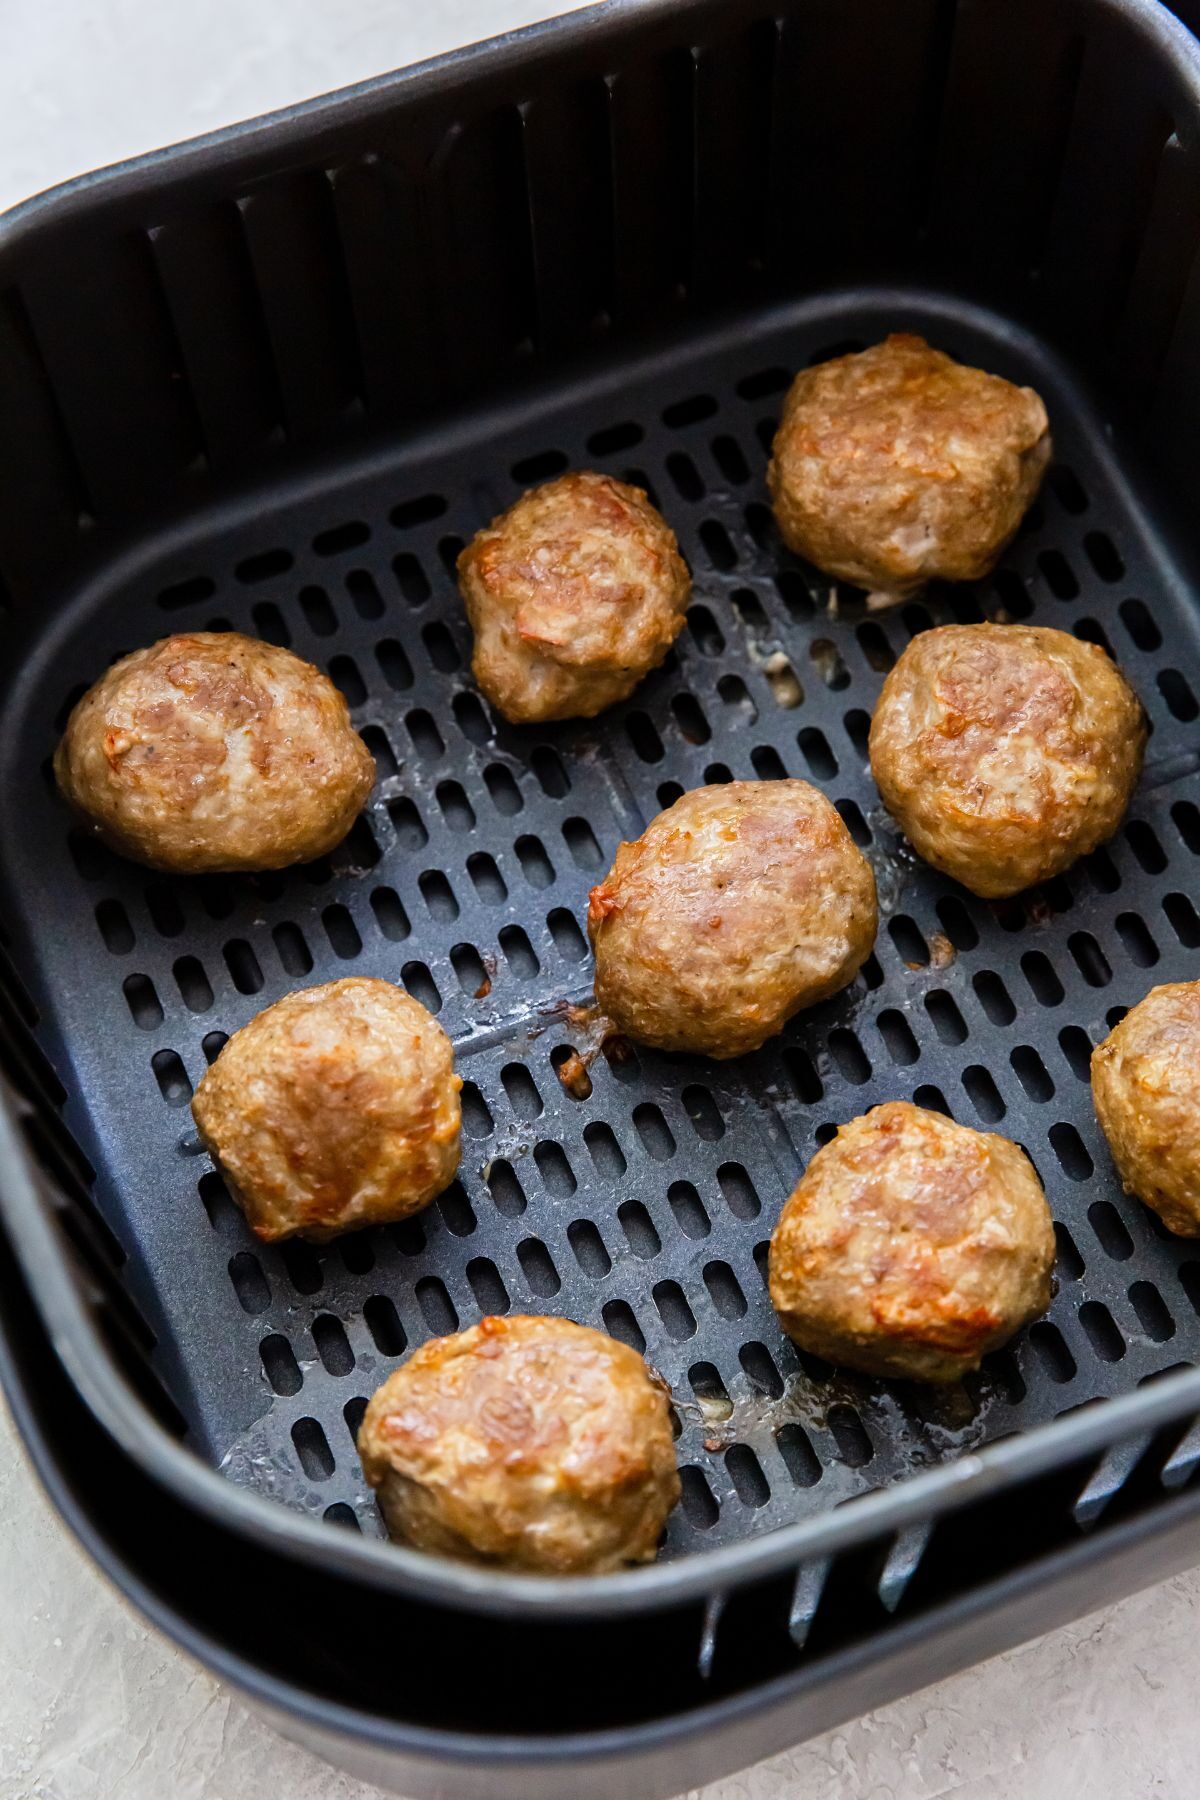 Cooked frozen meatball in the air fryer basket